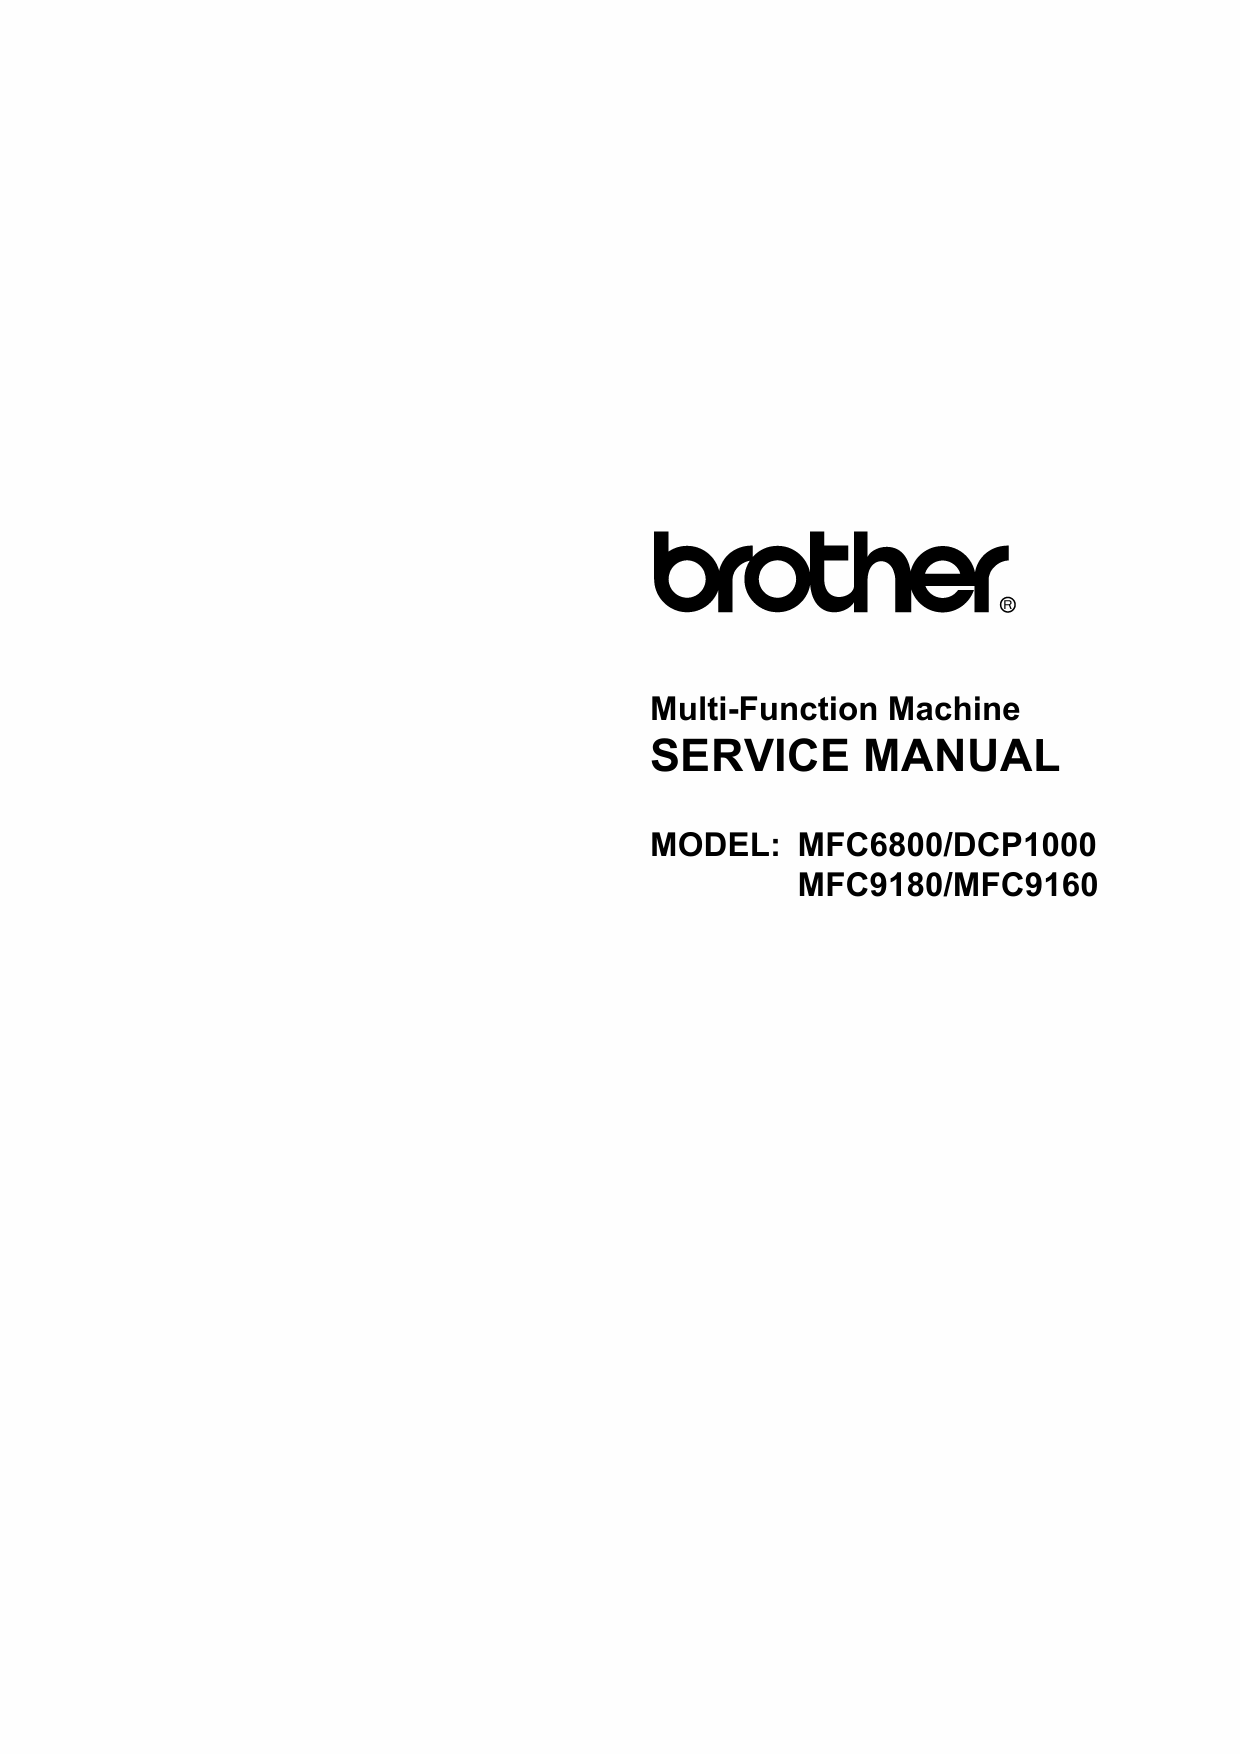 Brother MFC 6800 9160 9180 DCP1000 Service Manual-1